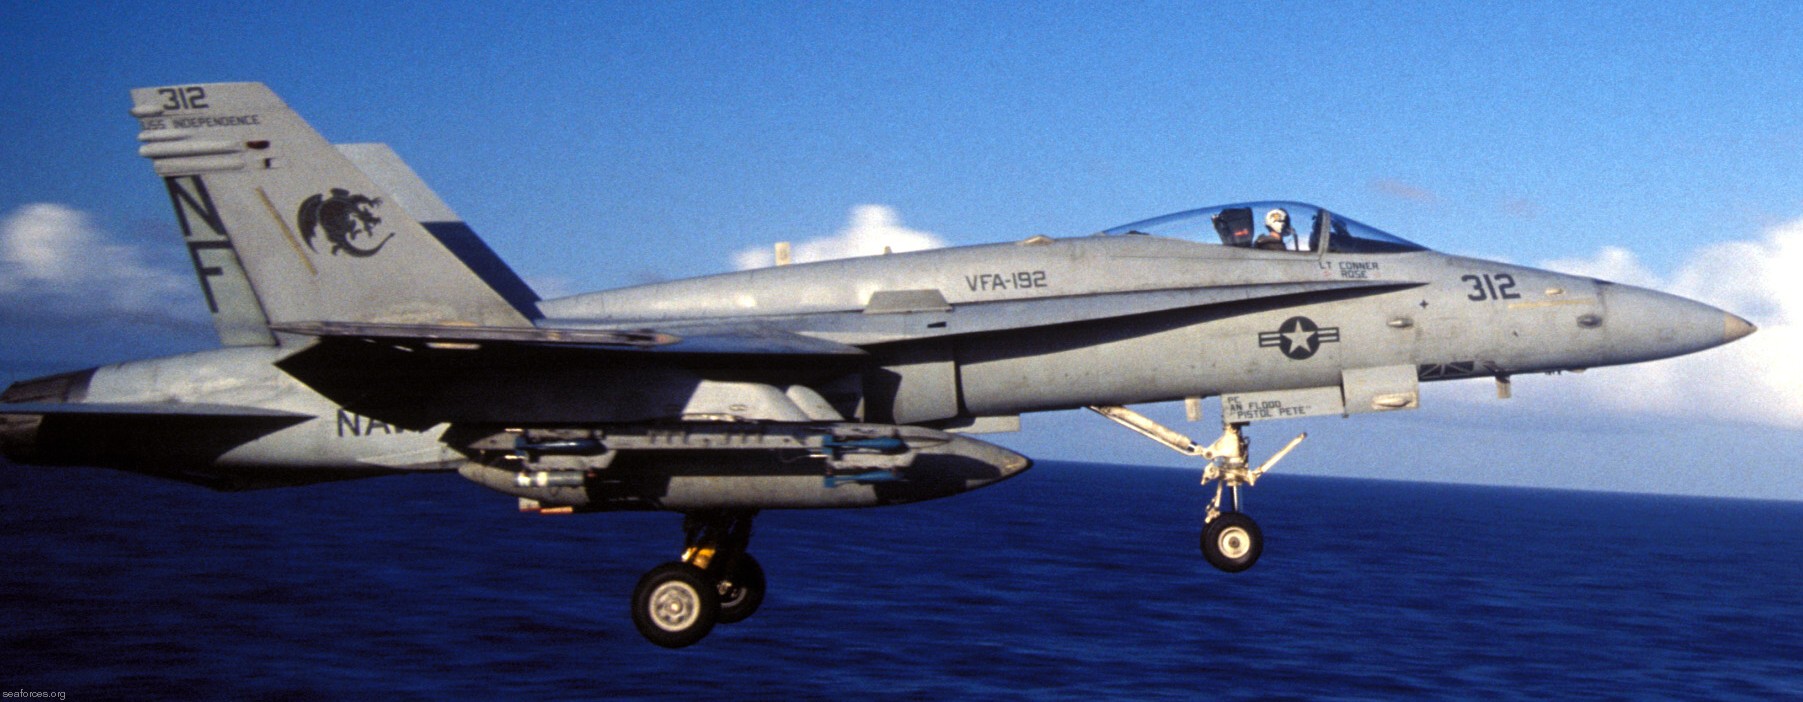 vfa-192 golden dragons strike fighter squadron navy f/a-18c hornet carrier air wing cvw-5 uss independence cv-62 117